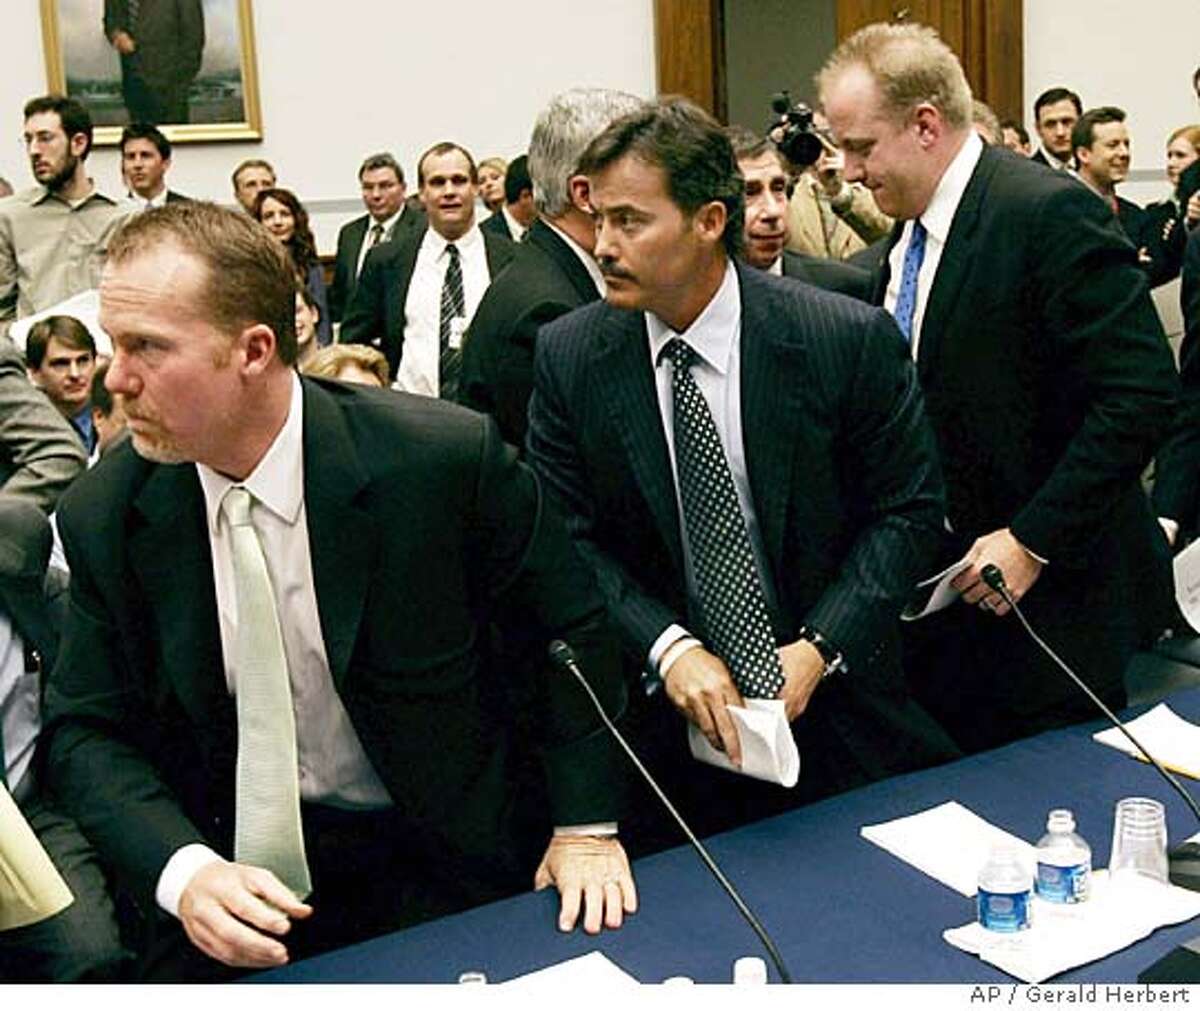 Former Oakland Athletic and St. Louis Cardinal Mark McGwire, left, Baltimore Orioles' Rafael Palmiero, center, and Boston Red Sox Curt Schilling leave the witness table during a break in the hearing on Capitol Hill to examine the use of steroids in professional baseball Thursday, March 17, 2005, in Washington. (AP Photo/Gerald Herbert)